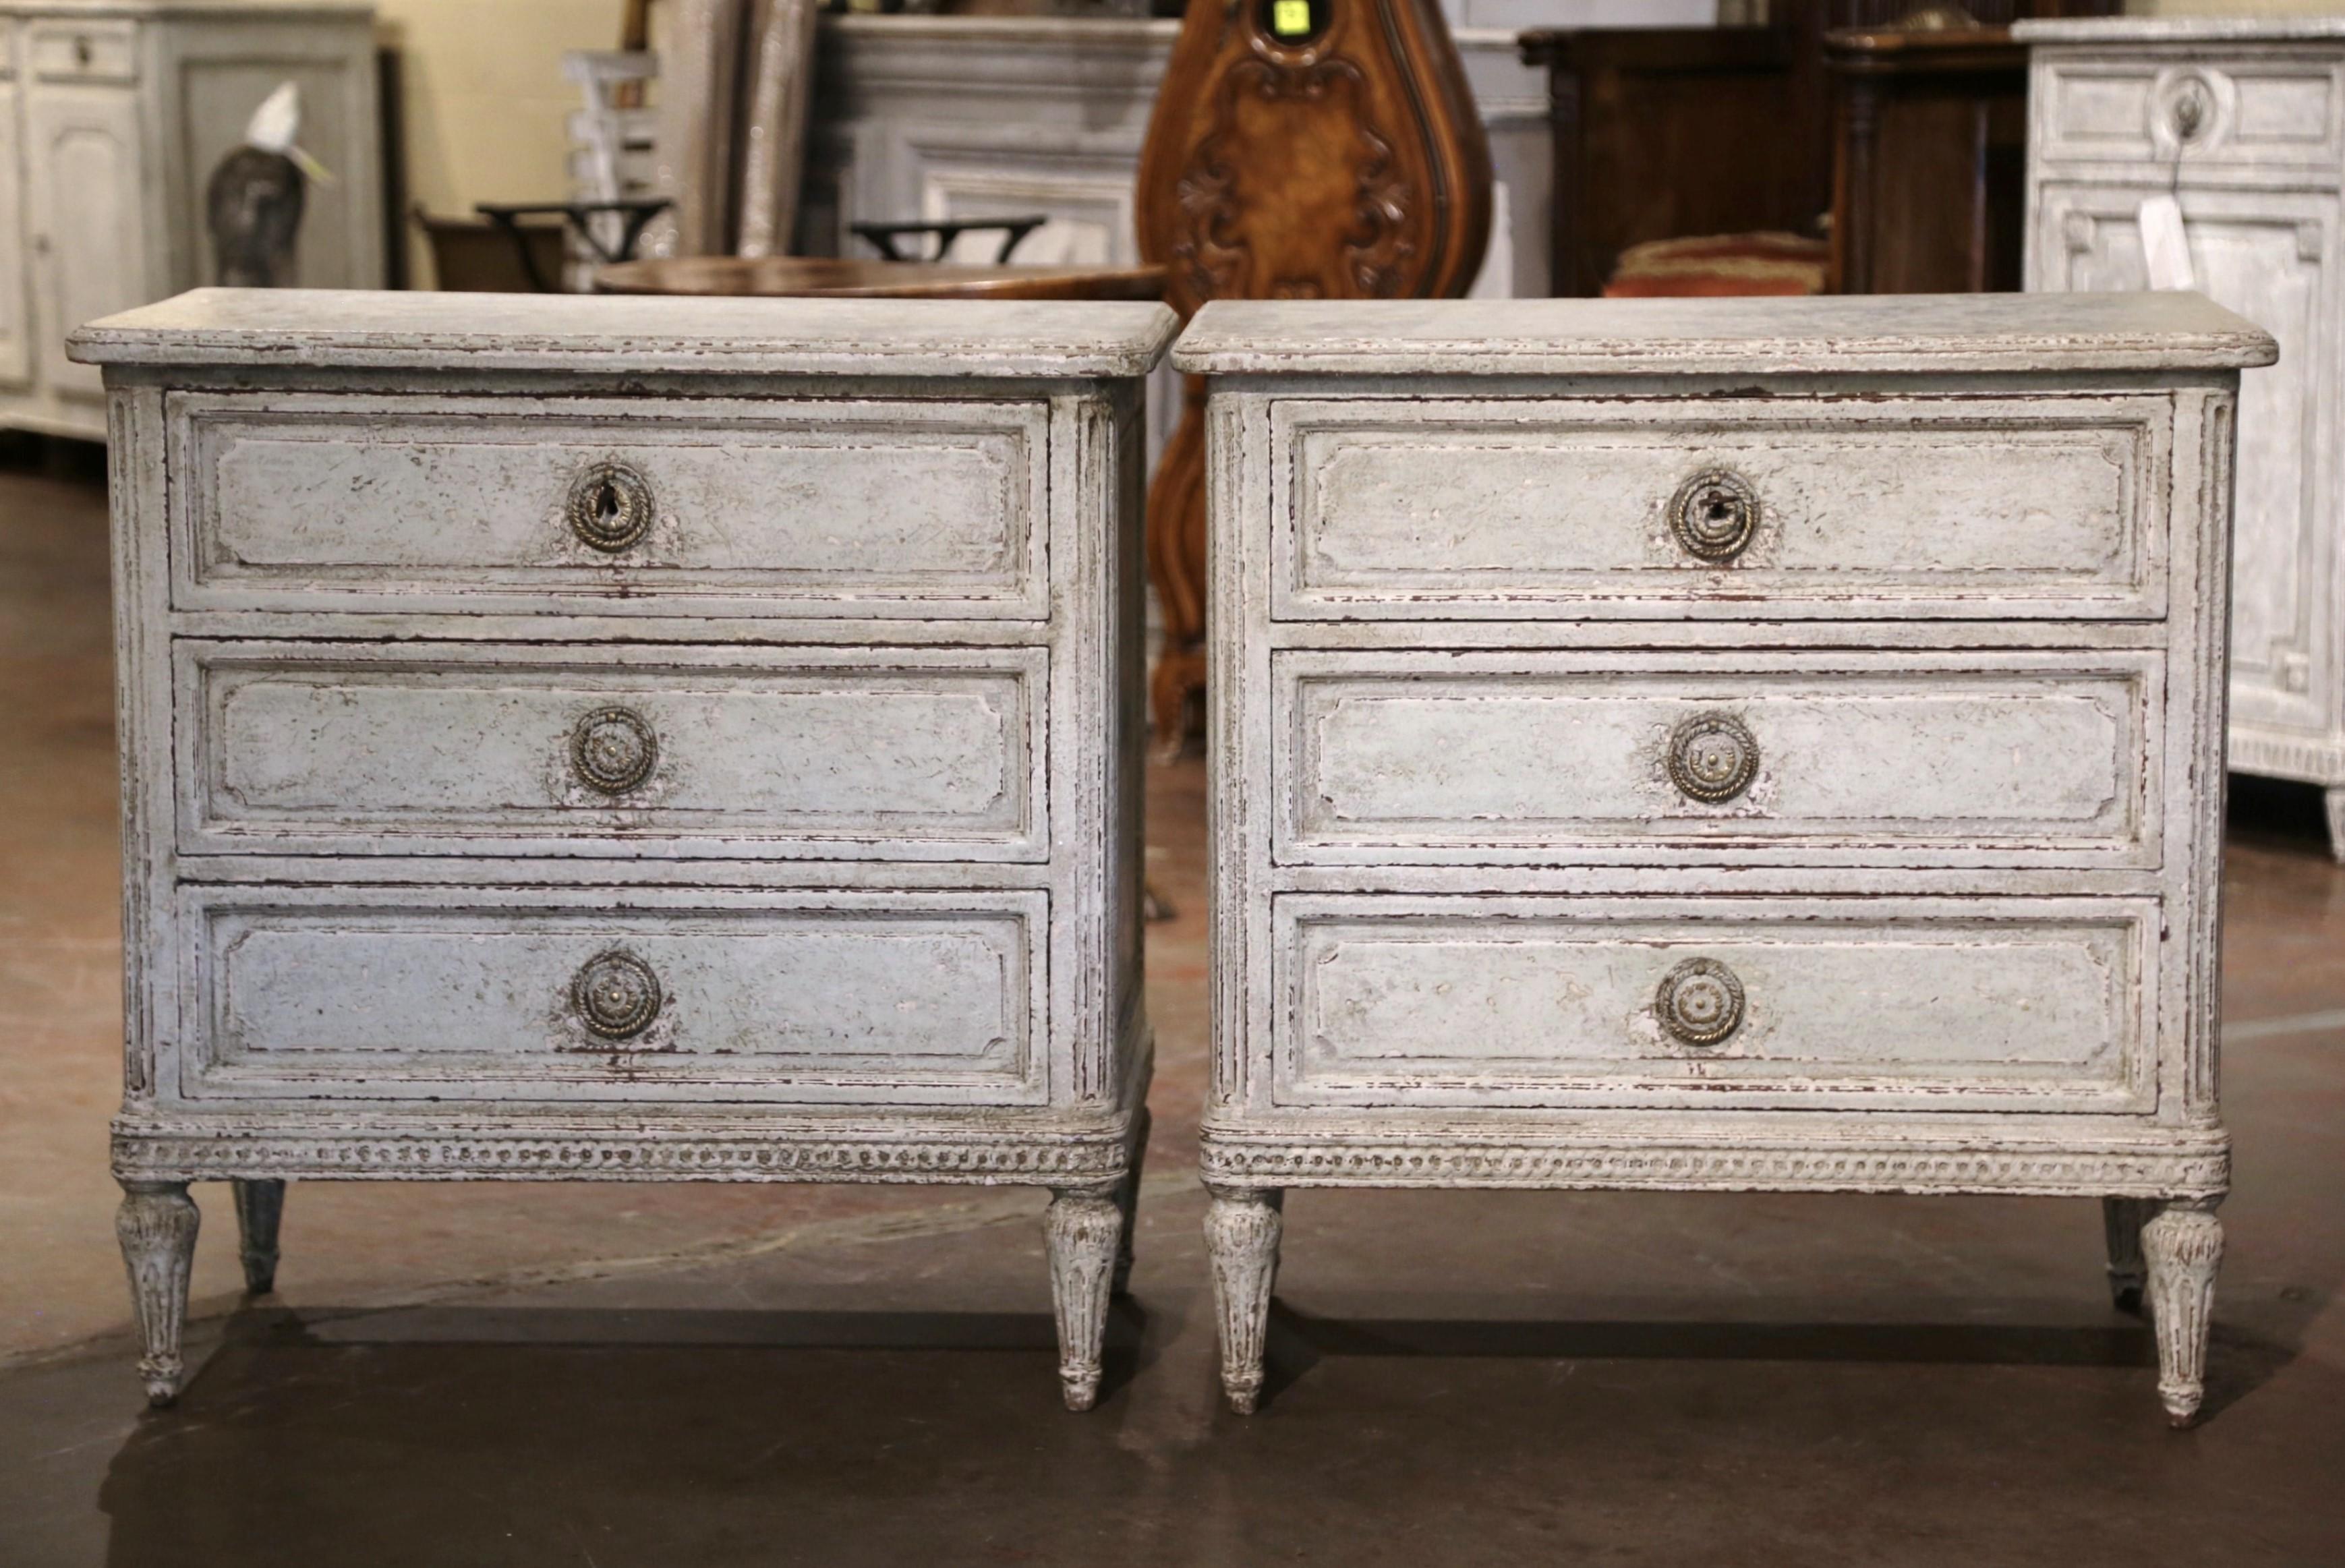 Complete your bedroom with this elegant pair of antique hand painted bedside cabinets; crafted in France, circa 1880, each commode stands on tapered and fluted legs over a straight apron decorated with geometric motif. Each chest features three